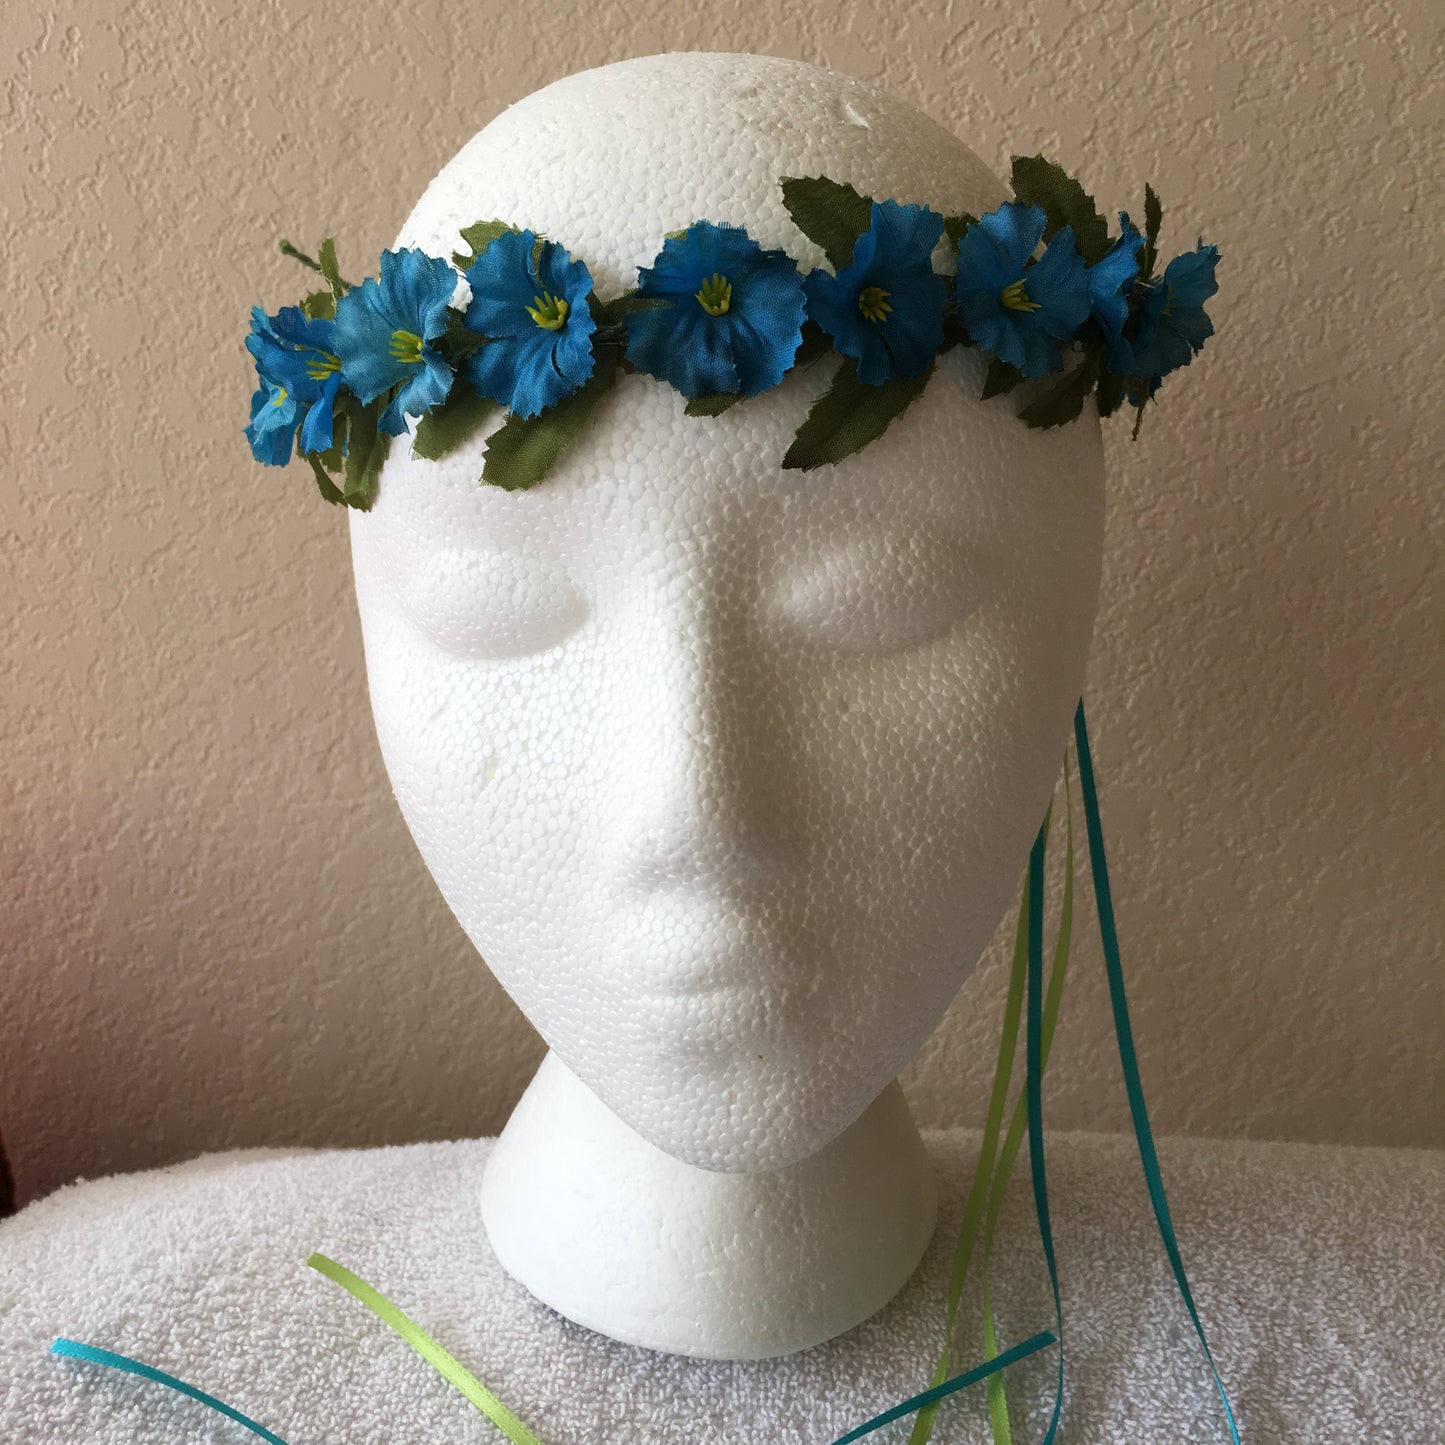 Extra Small Wreath - All teal flowers +